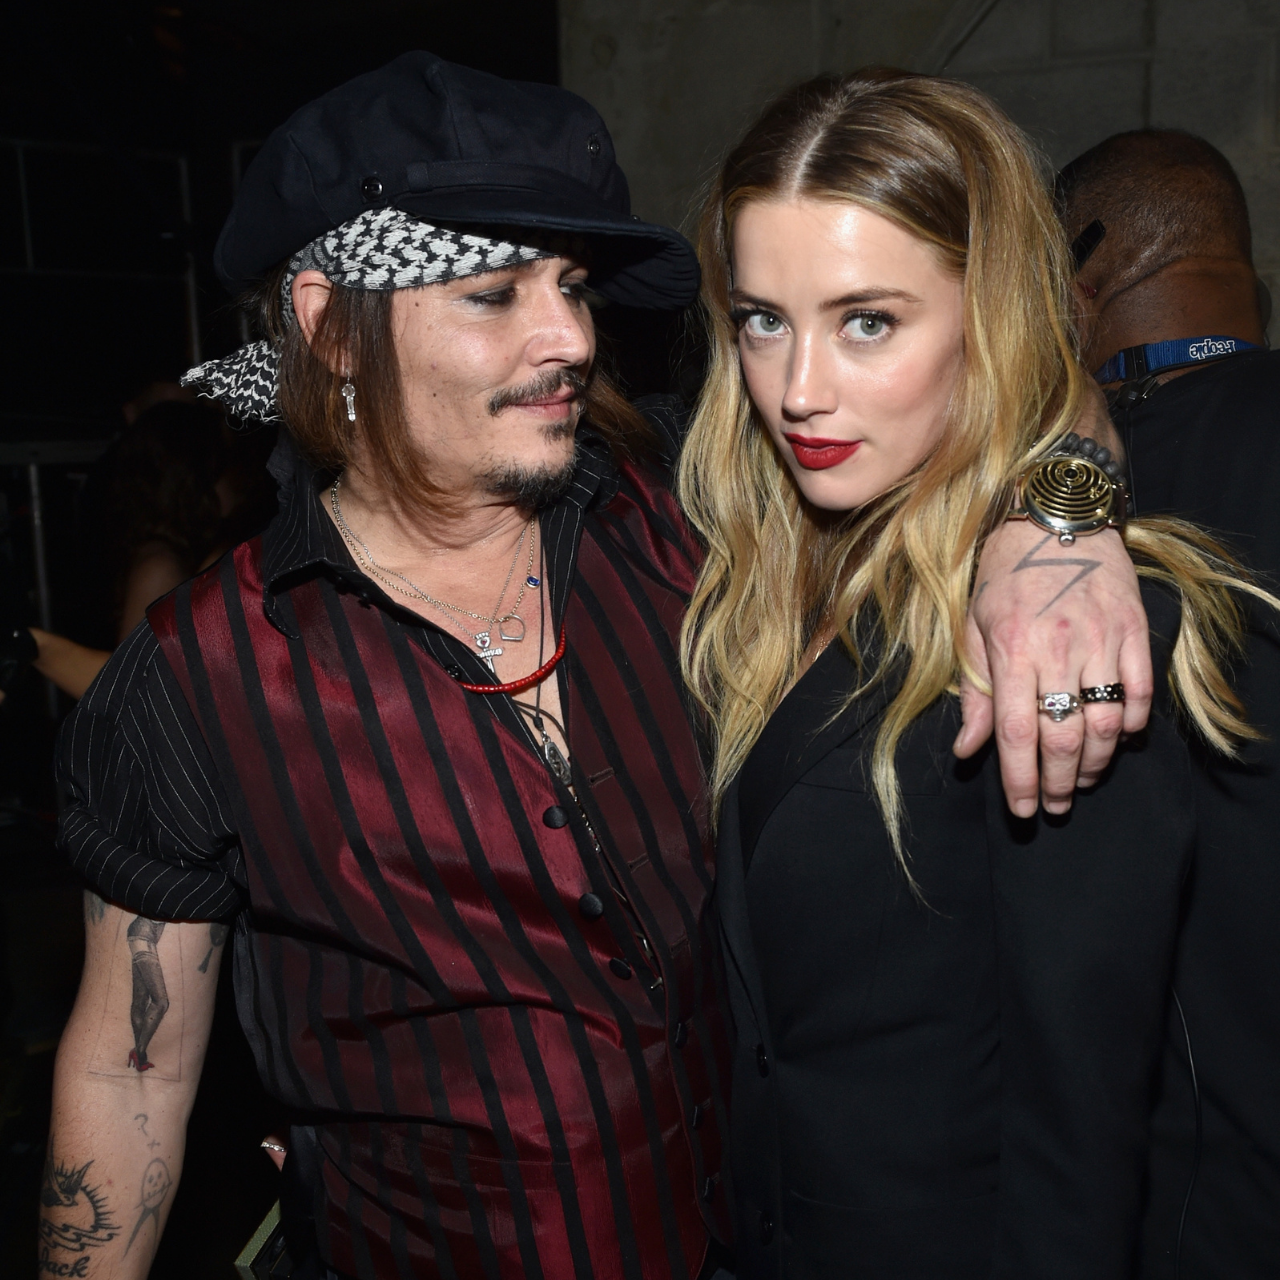 Johnny Depp and Amber Heard attend the 58th Grammy Awards in 2016